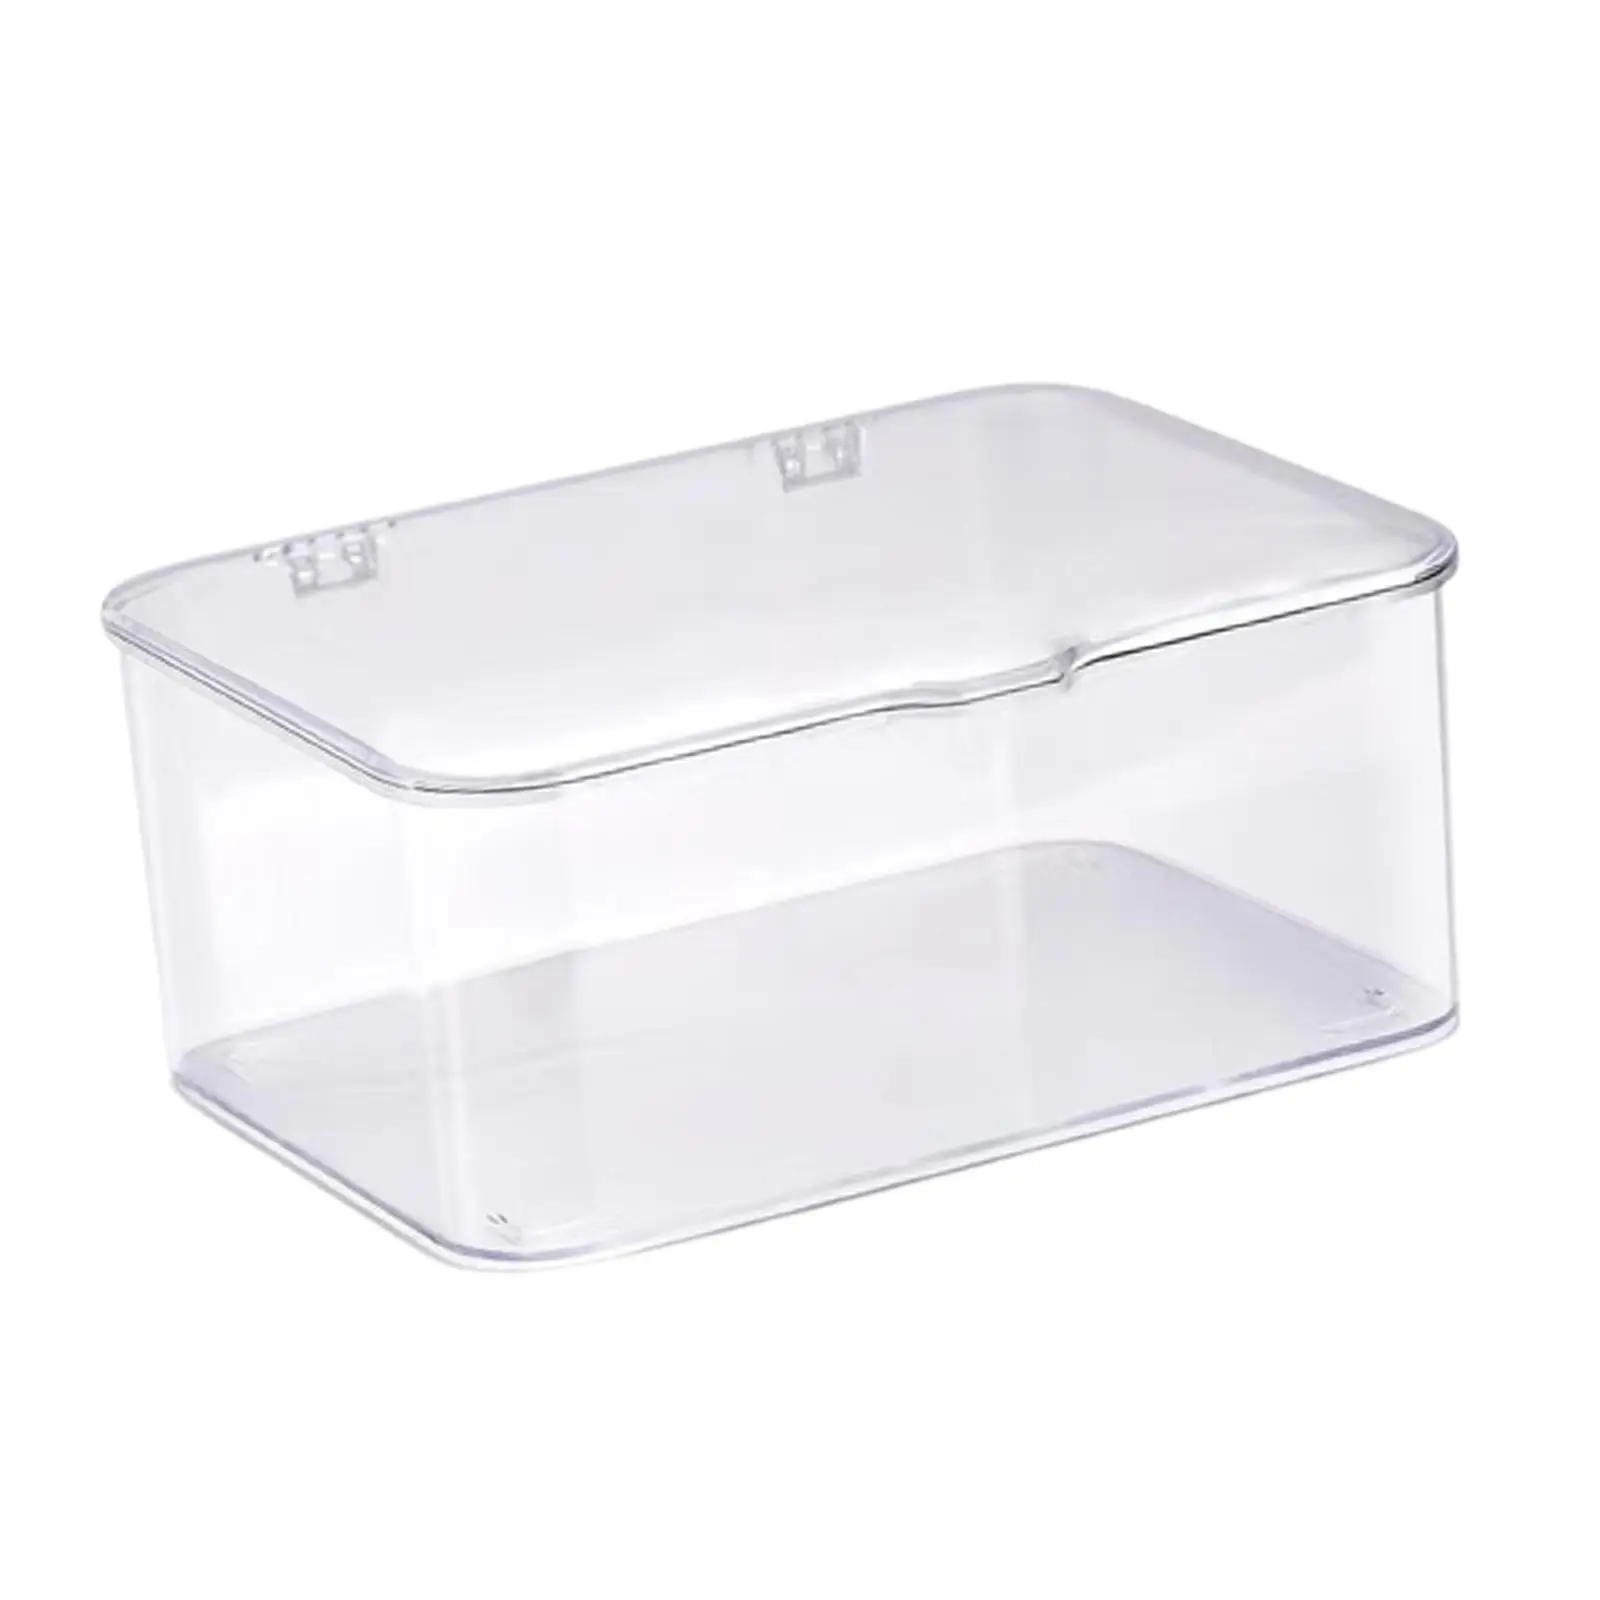 Clear Storage Box Organizer Jewelry Case Accessory Functional Sturdy Durable for Bathroom, Craft Room Versatile Stacking Drawer